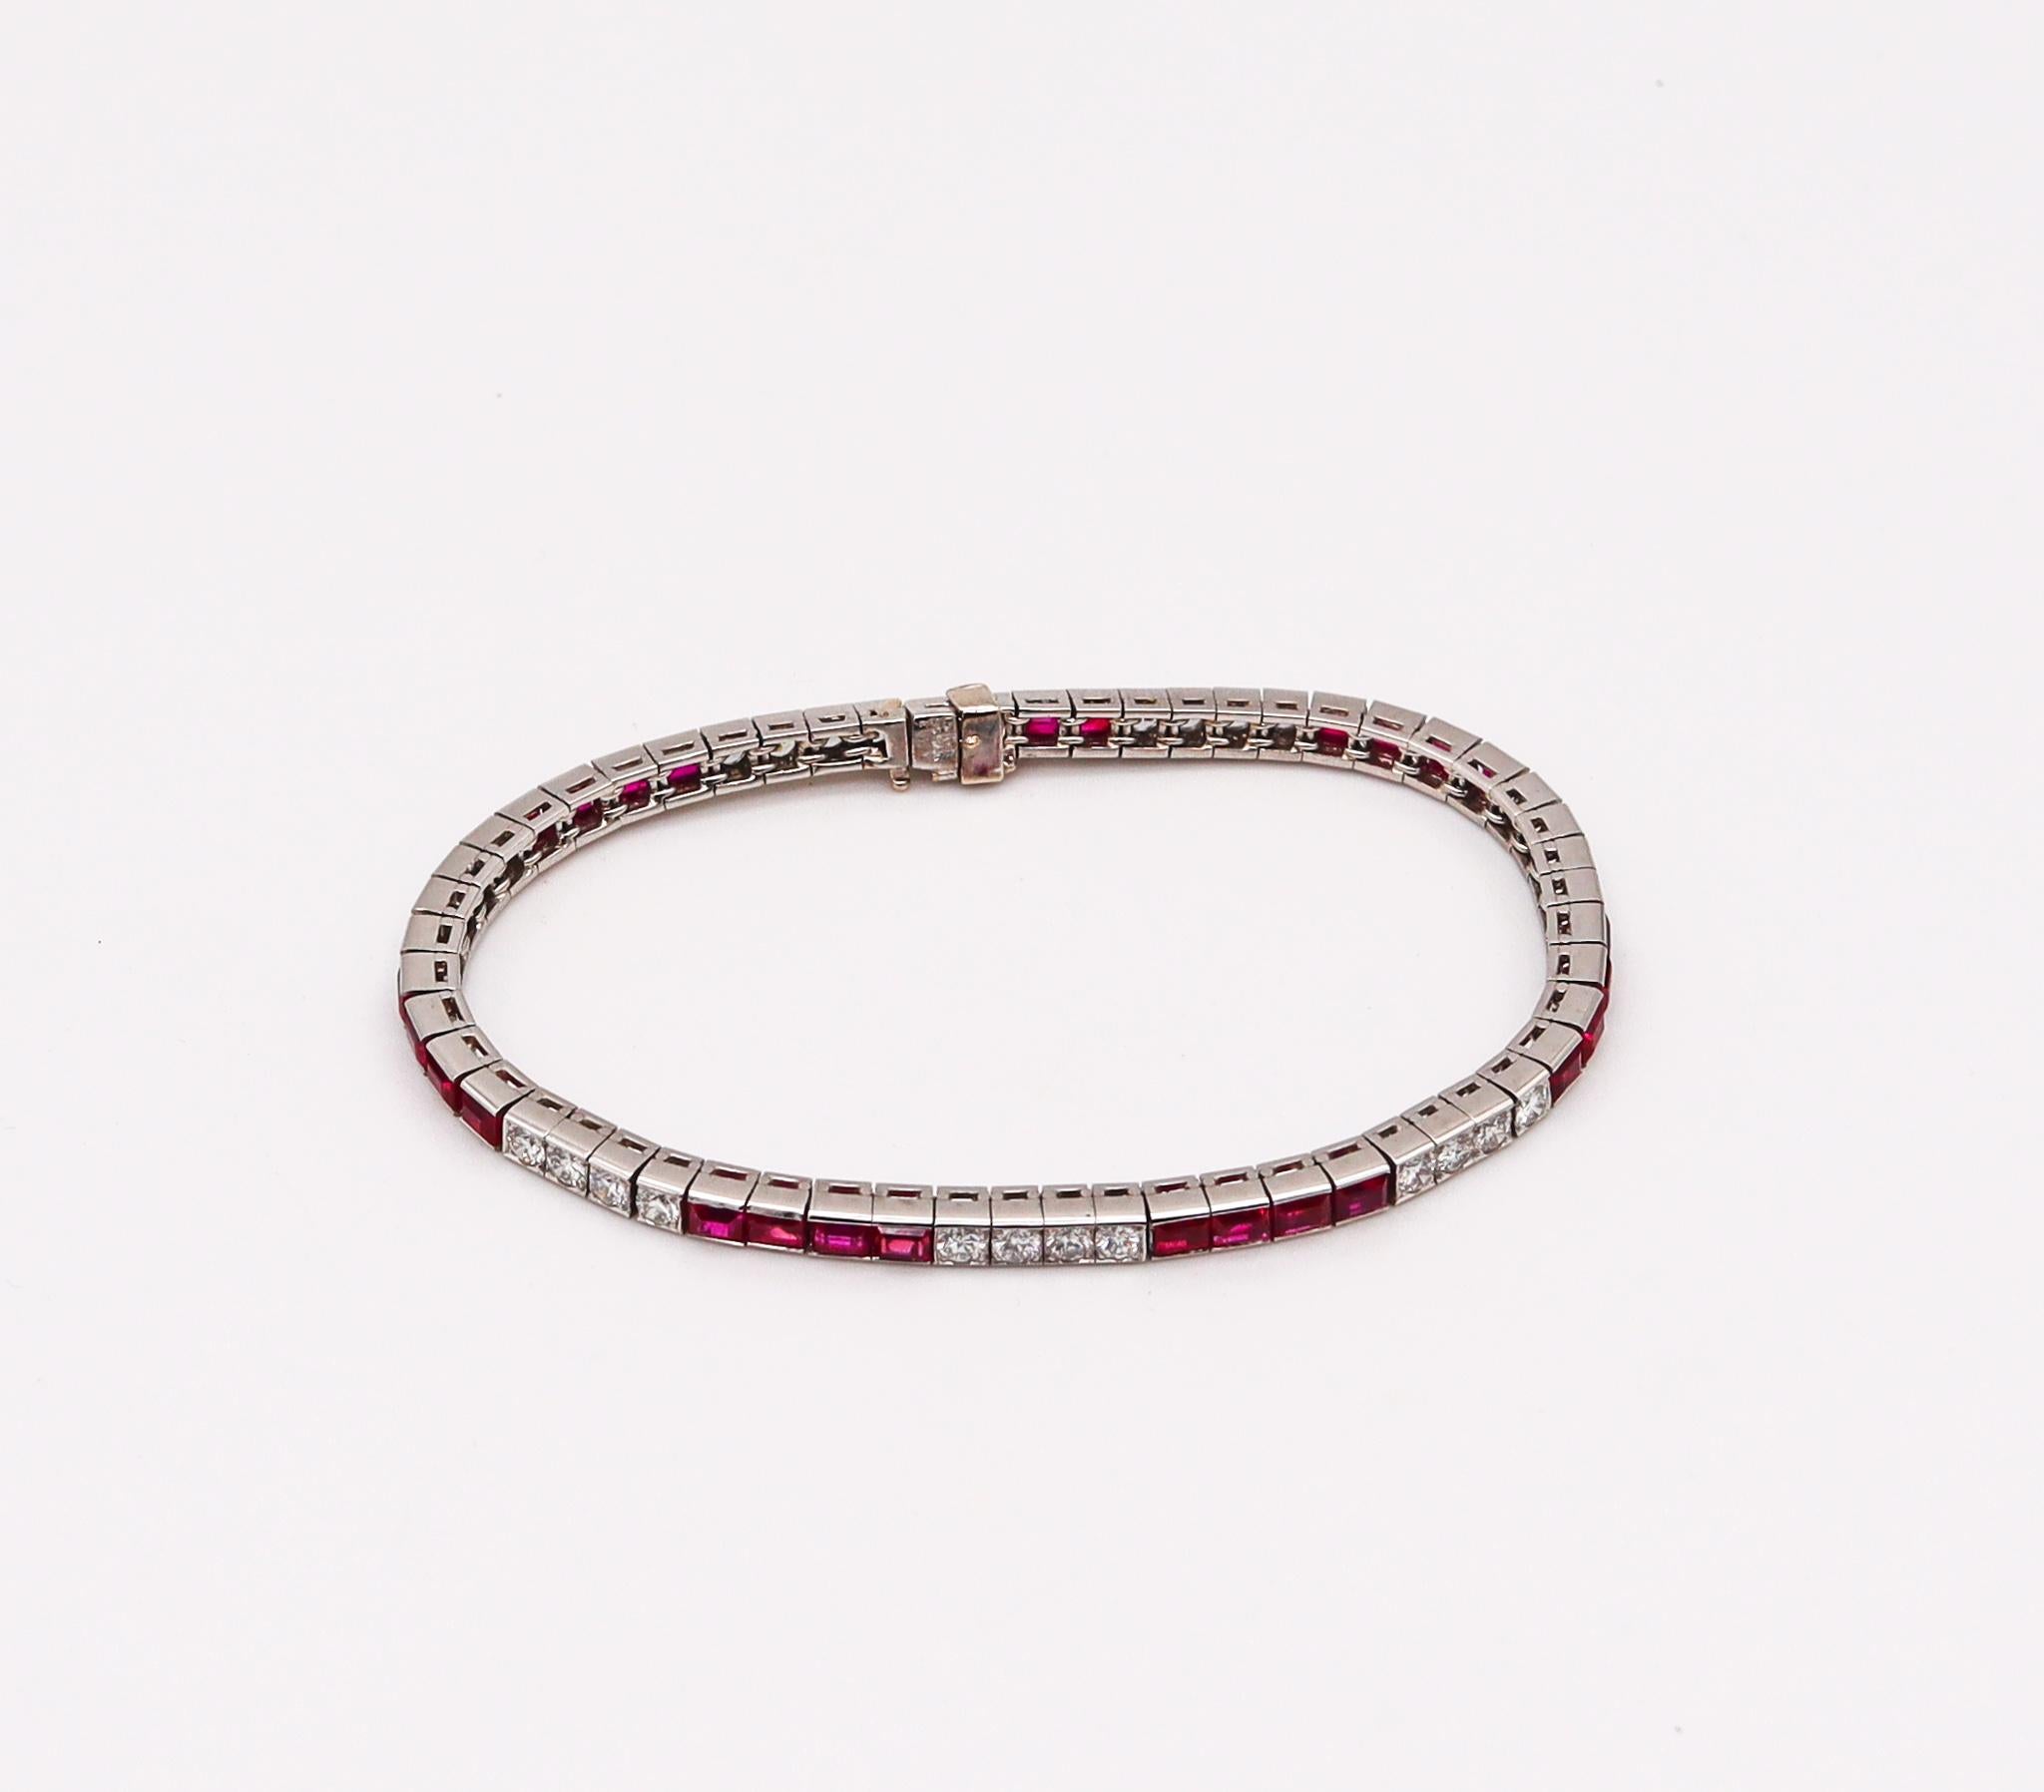 Gia certified stations bracelet by M. Waslikoff & Sons.

Beautiful and rare piece from the American art-deco period, created in New York city, back in the 1935. This fabulous bracelet has been carefully crafted with impeccable details at the jewelry